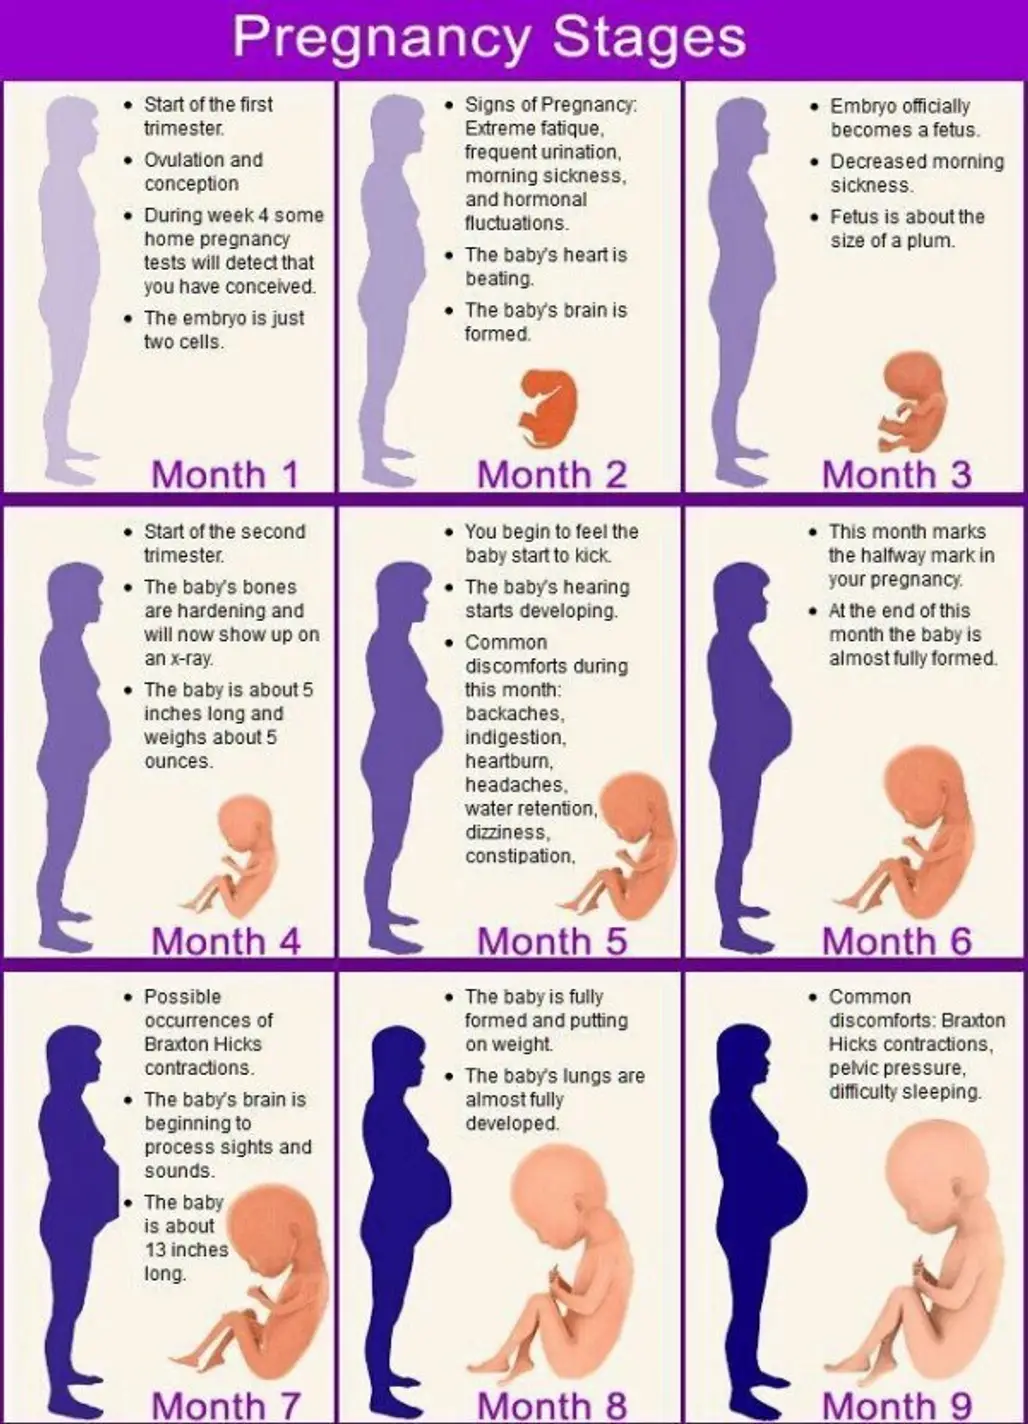 Pregnancy Stages in 9 Months